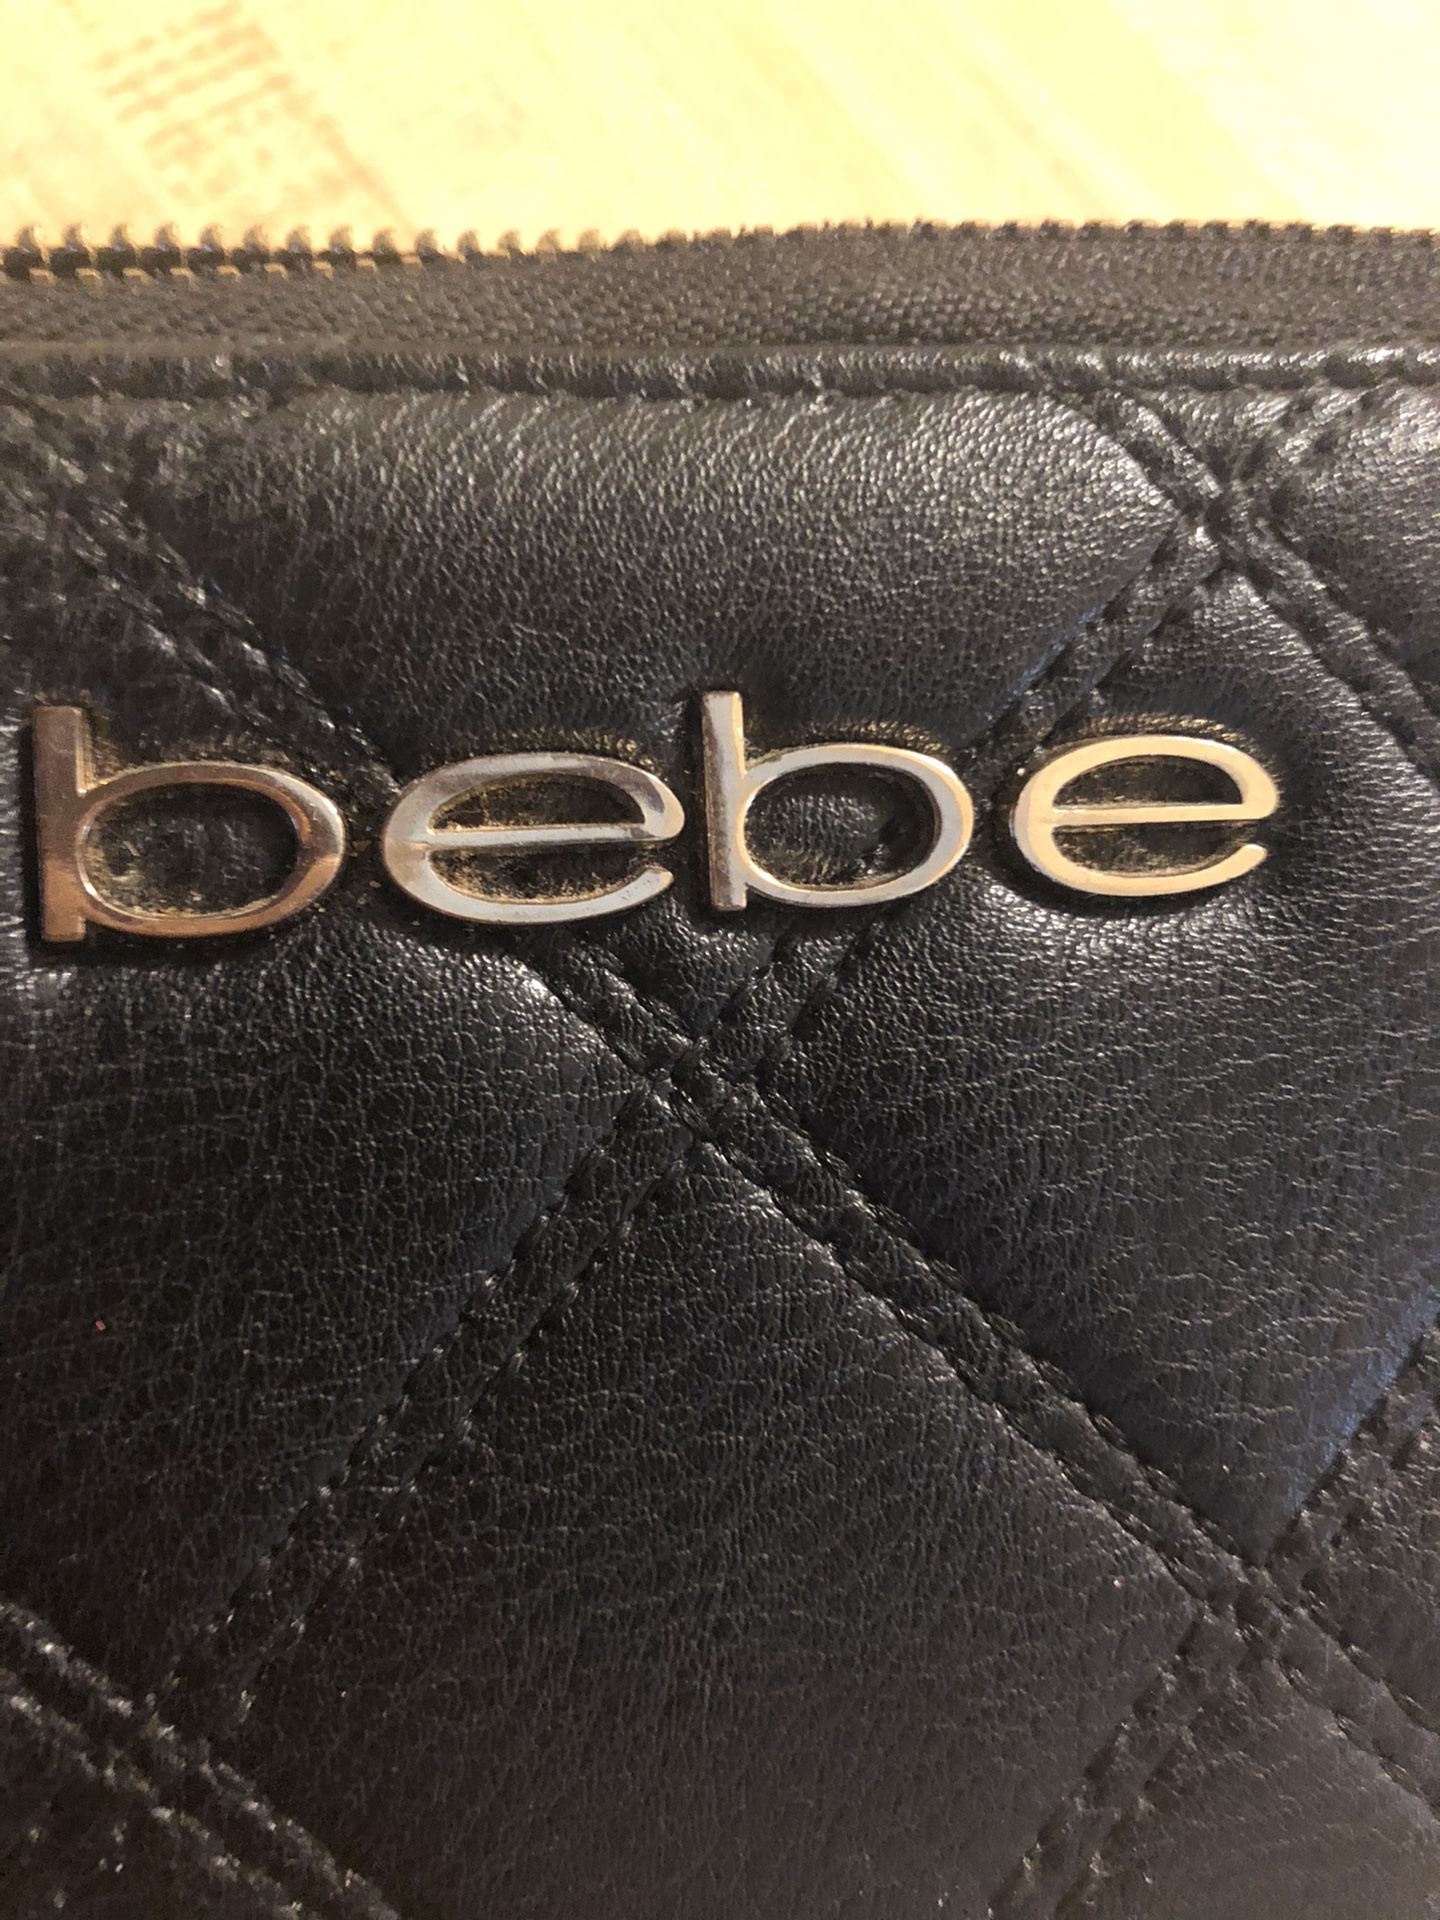 New leather Bebe wallet with zipper closure. $25